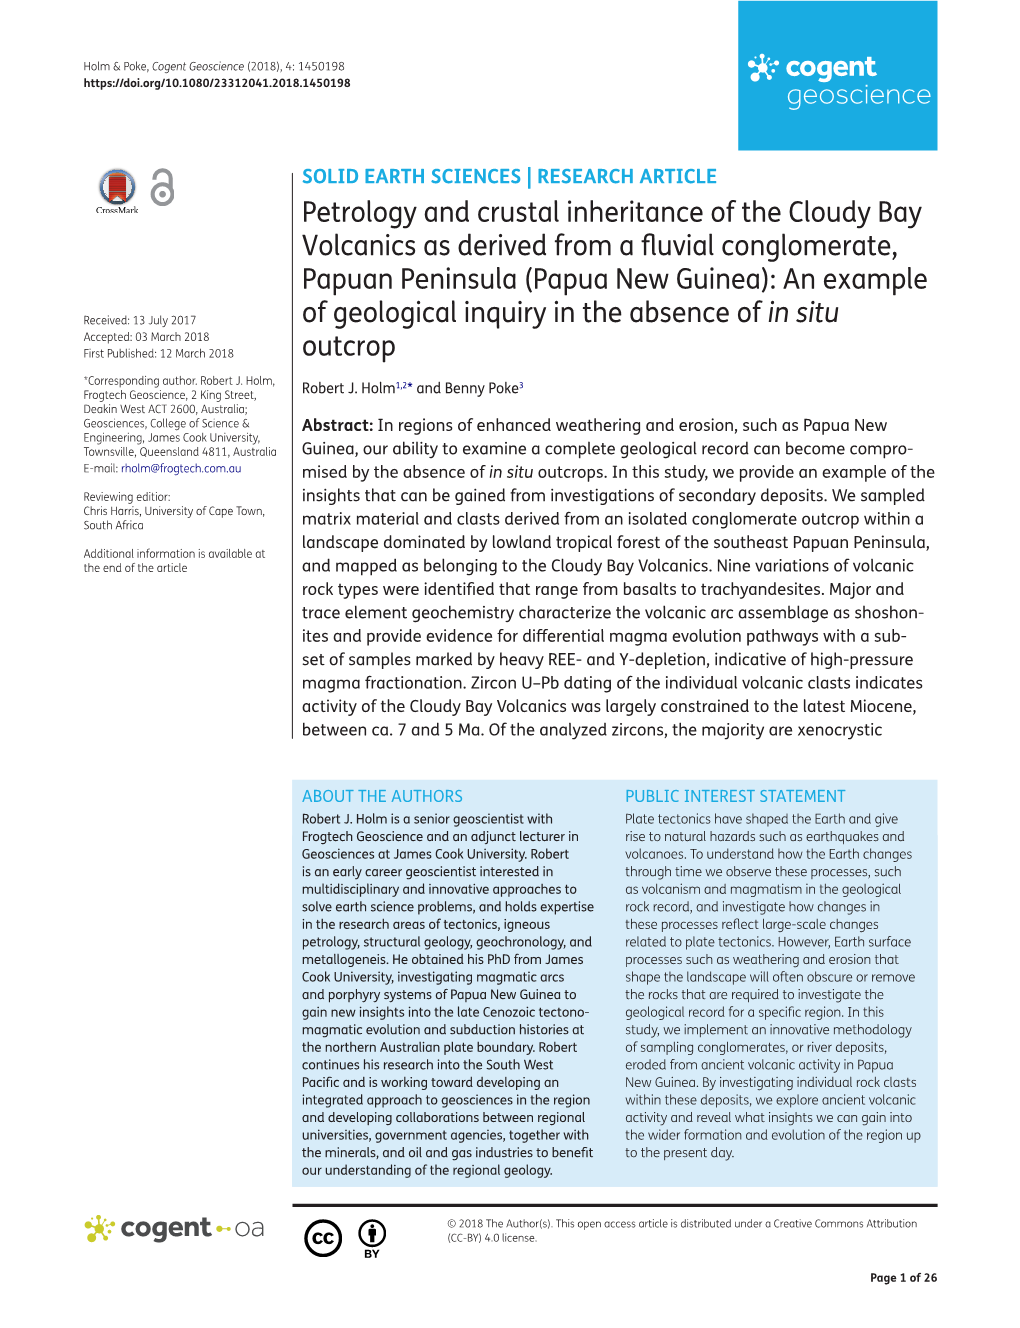 Petrology and Crustal Inheritance of the Cloudy Bay Volcanics As Derived from a Fluvial Conglomerate, Papuan Peninsula (Papua New Guinea): an Example